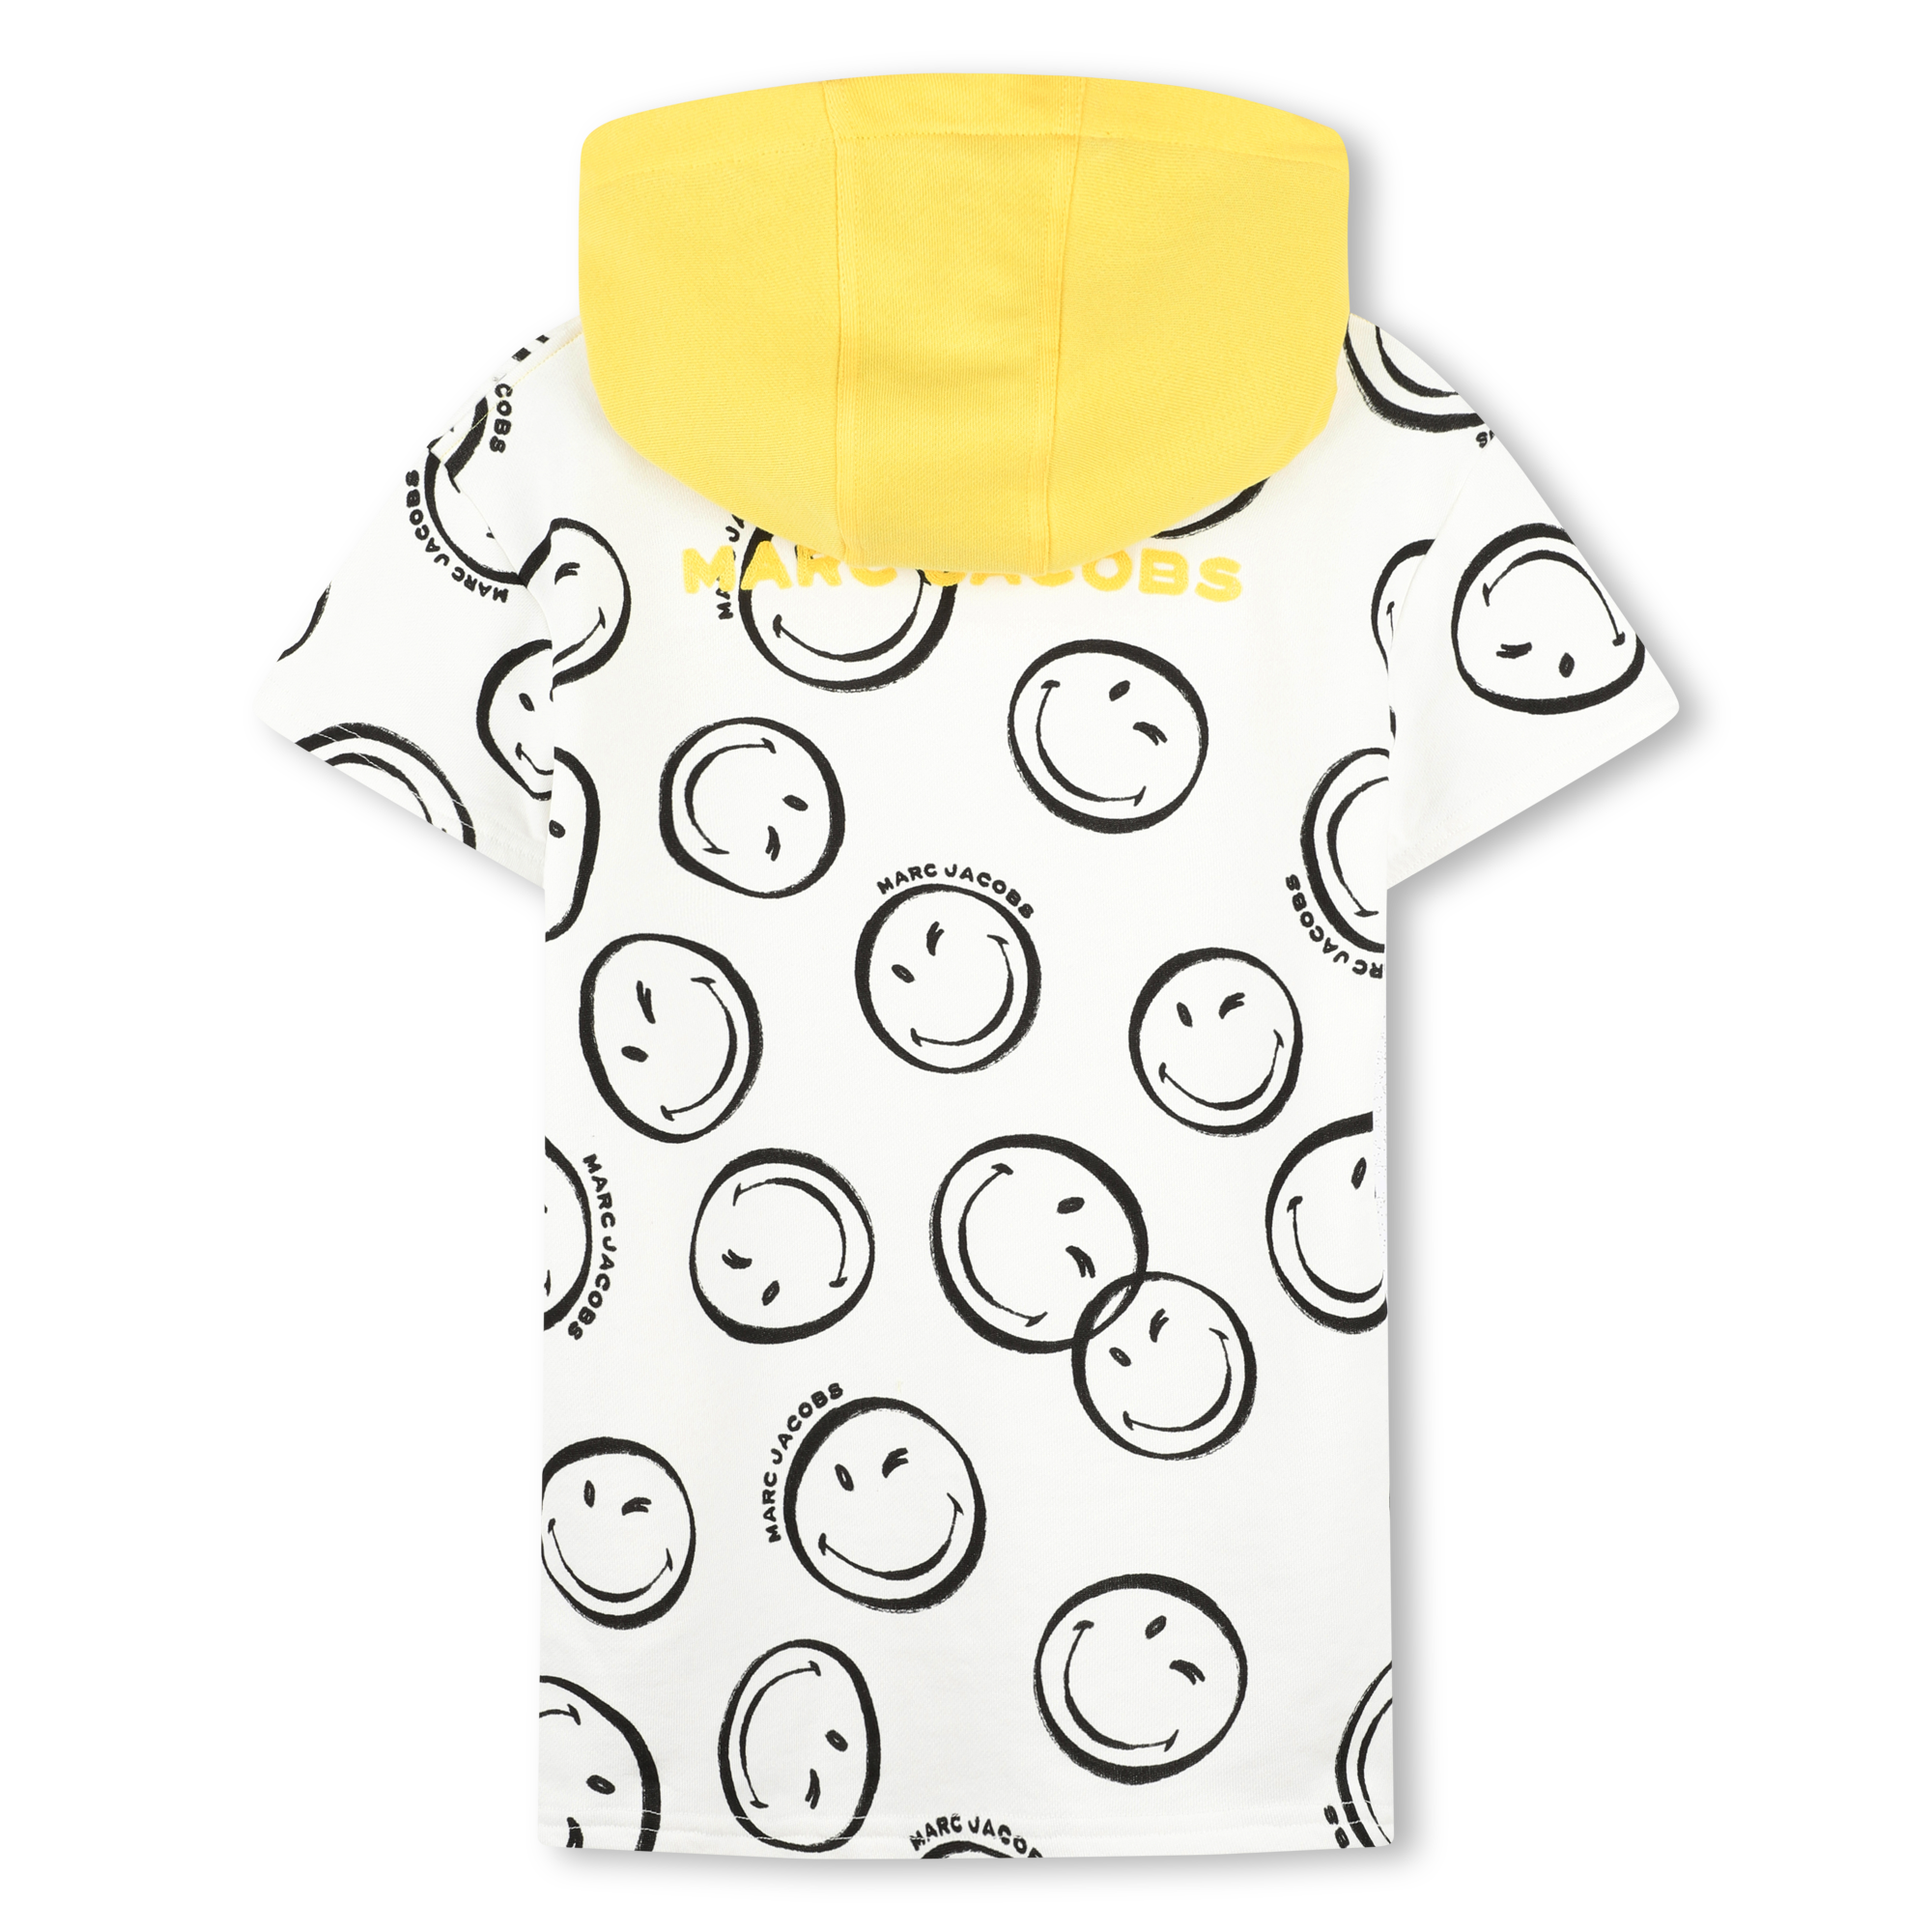 Hooded smiley face dress MARC JACOBS for GIRL